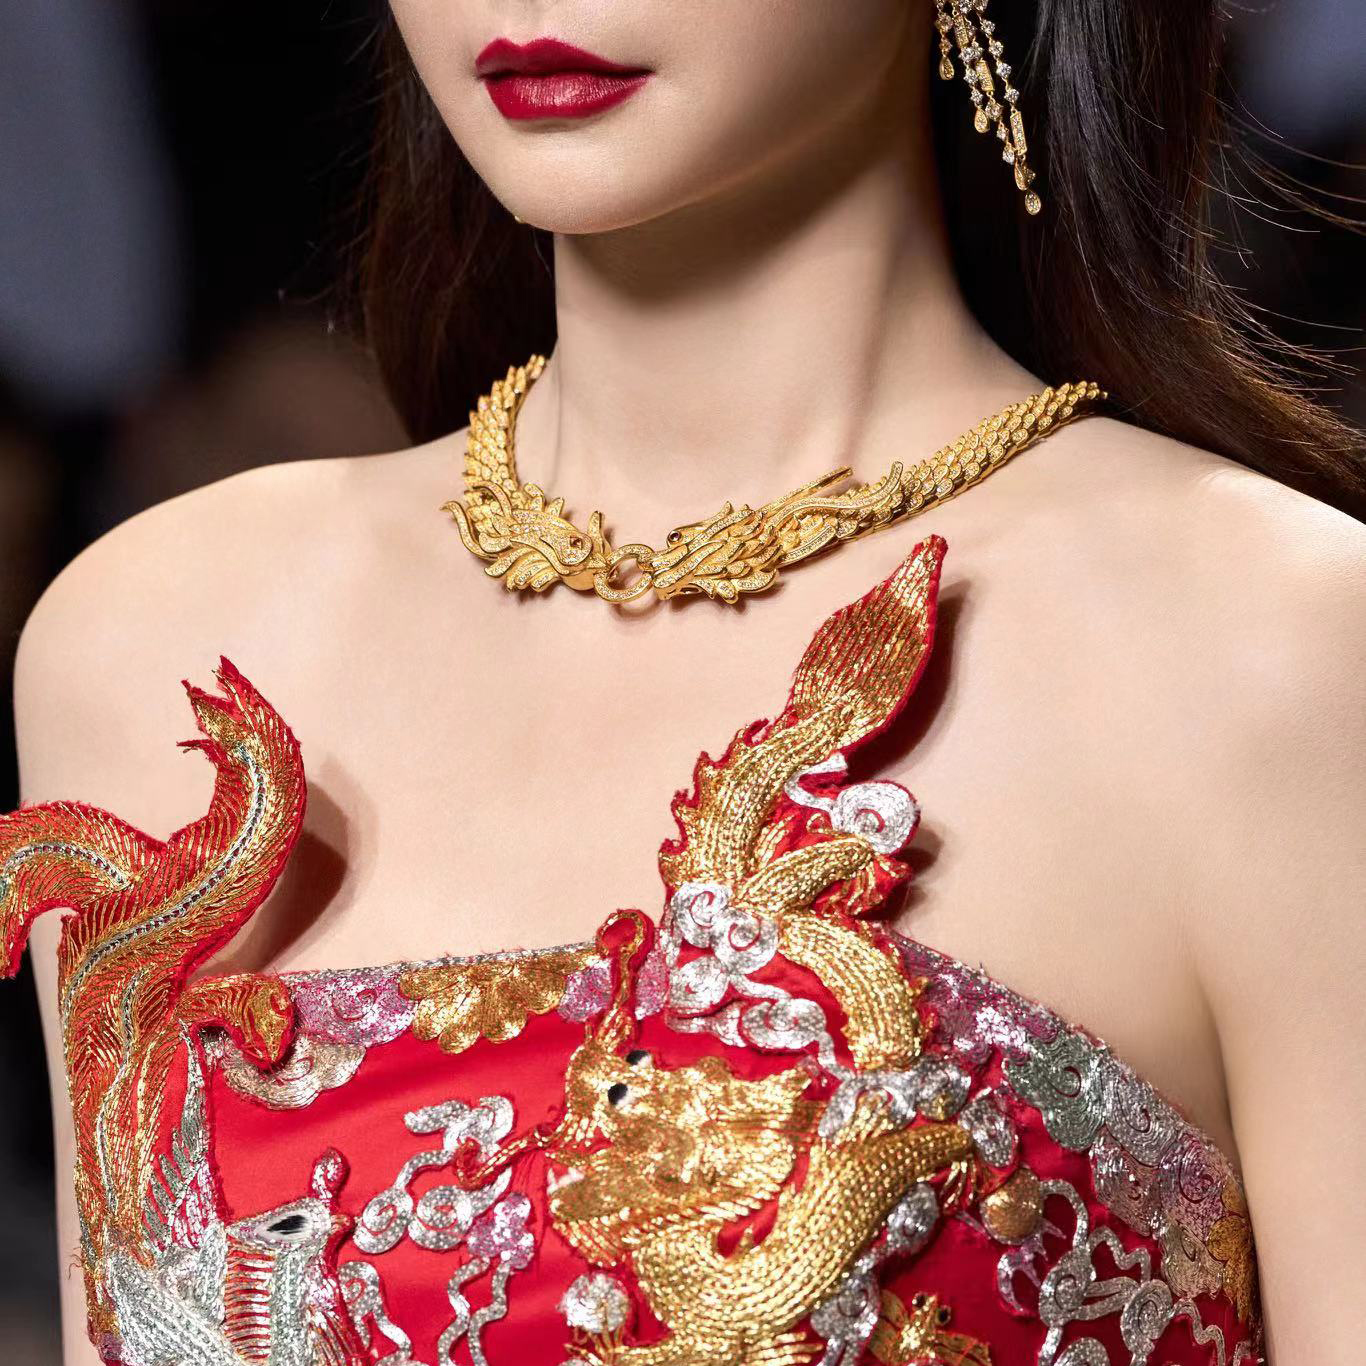 DR x VIVIENNE TAM Chinese High-end Bridal Jewelry Collection